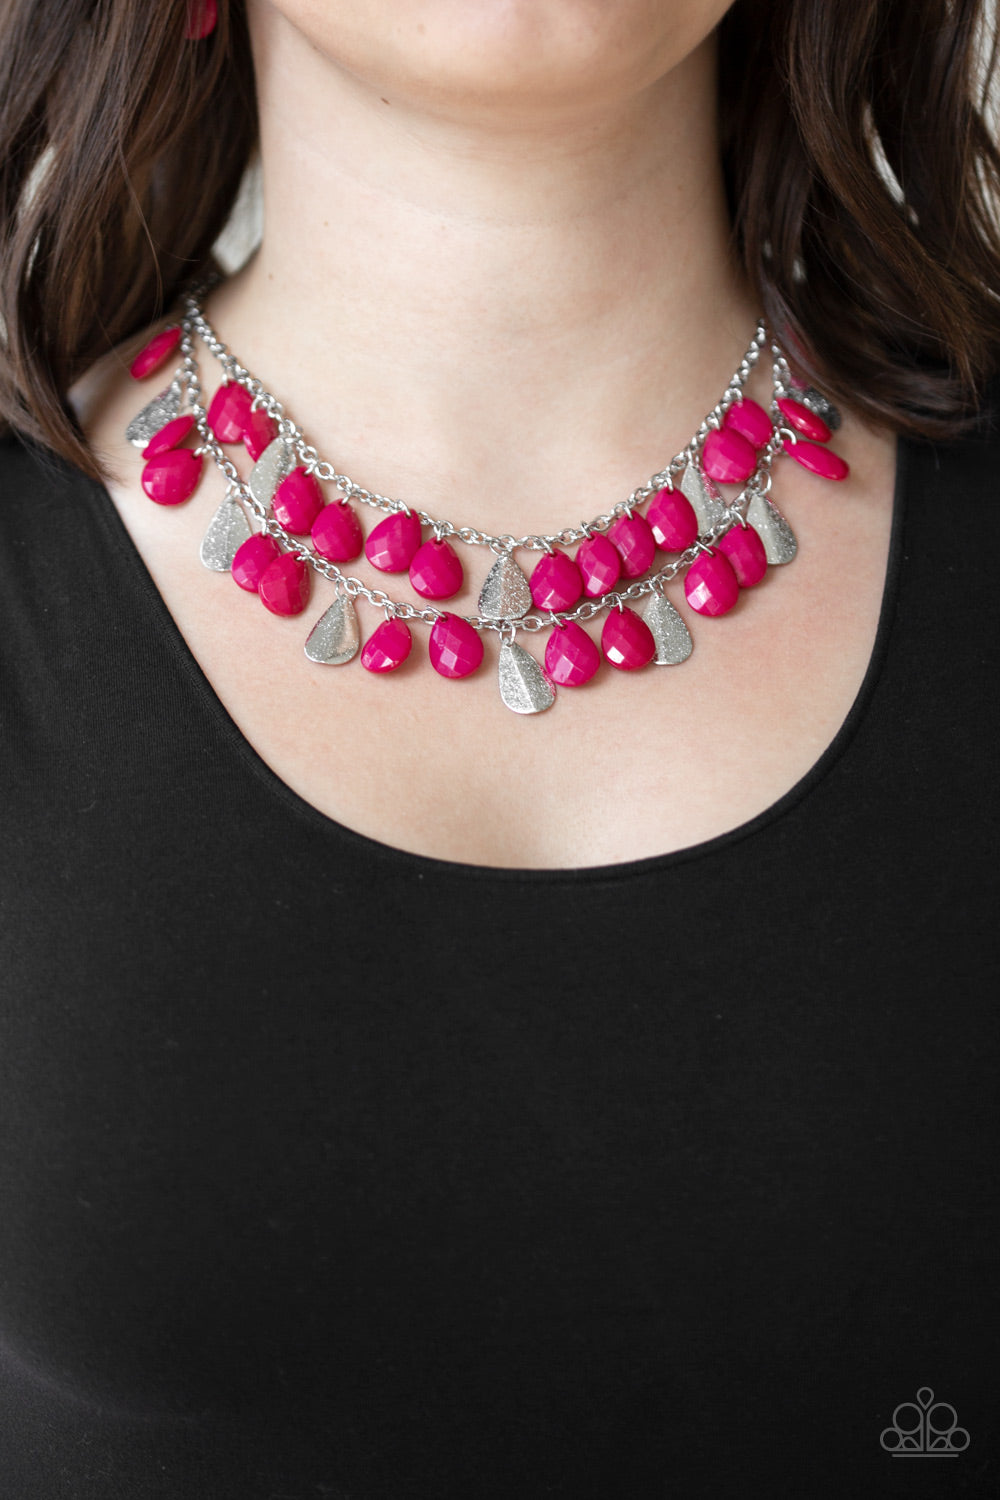 LIFE OF THE FIESTA - PINK AND SILVER FRINGE NECKLACE